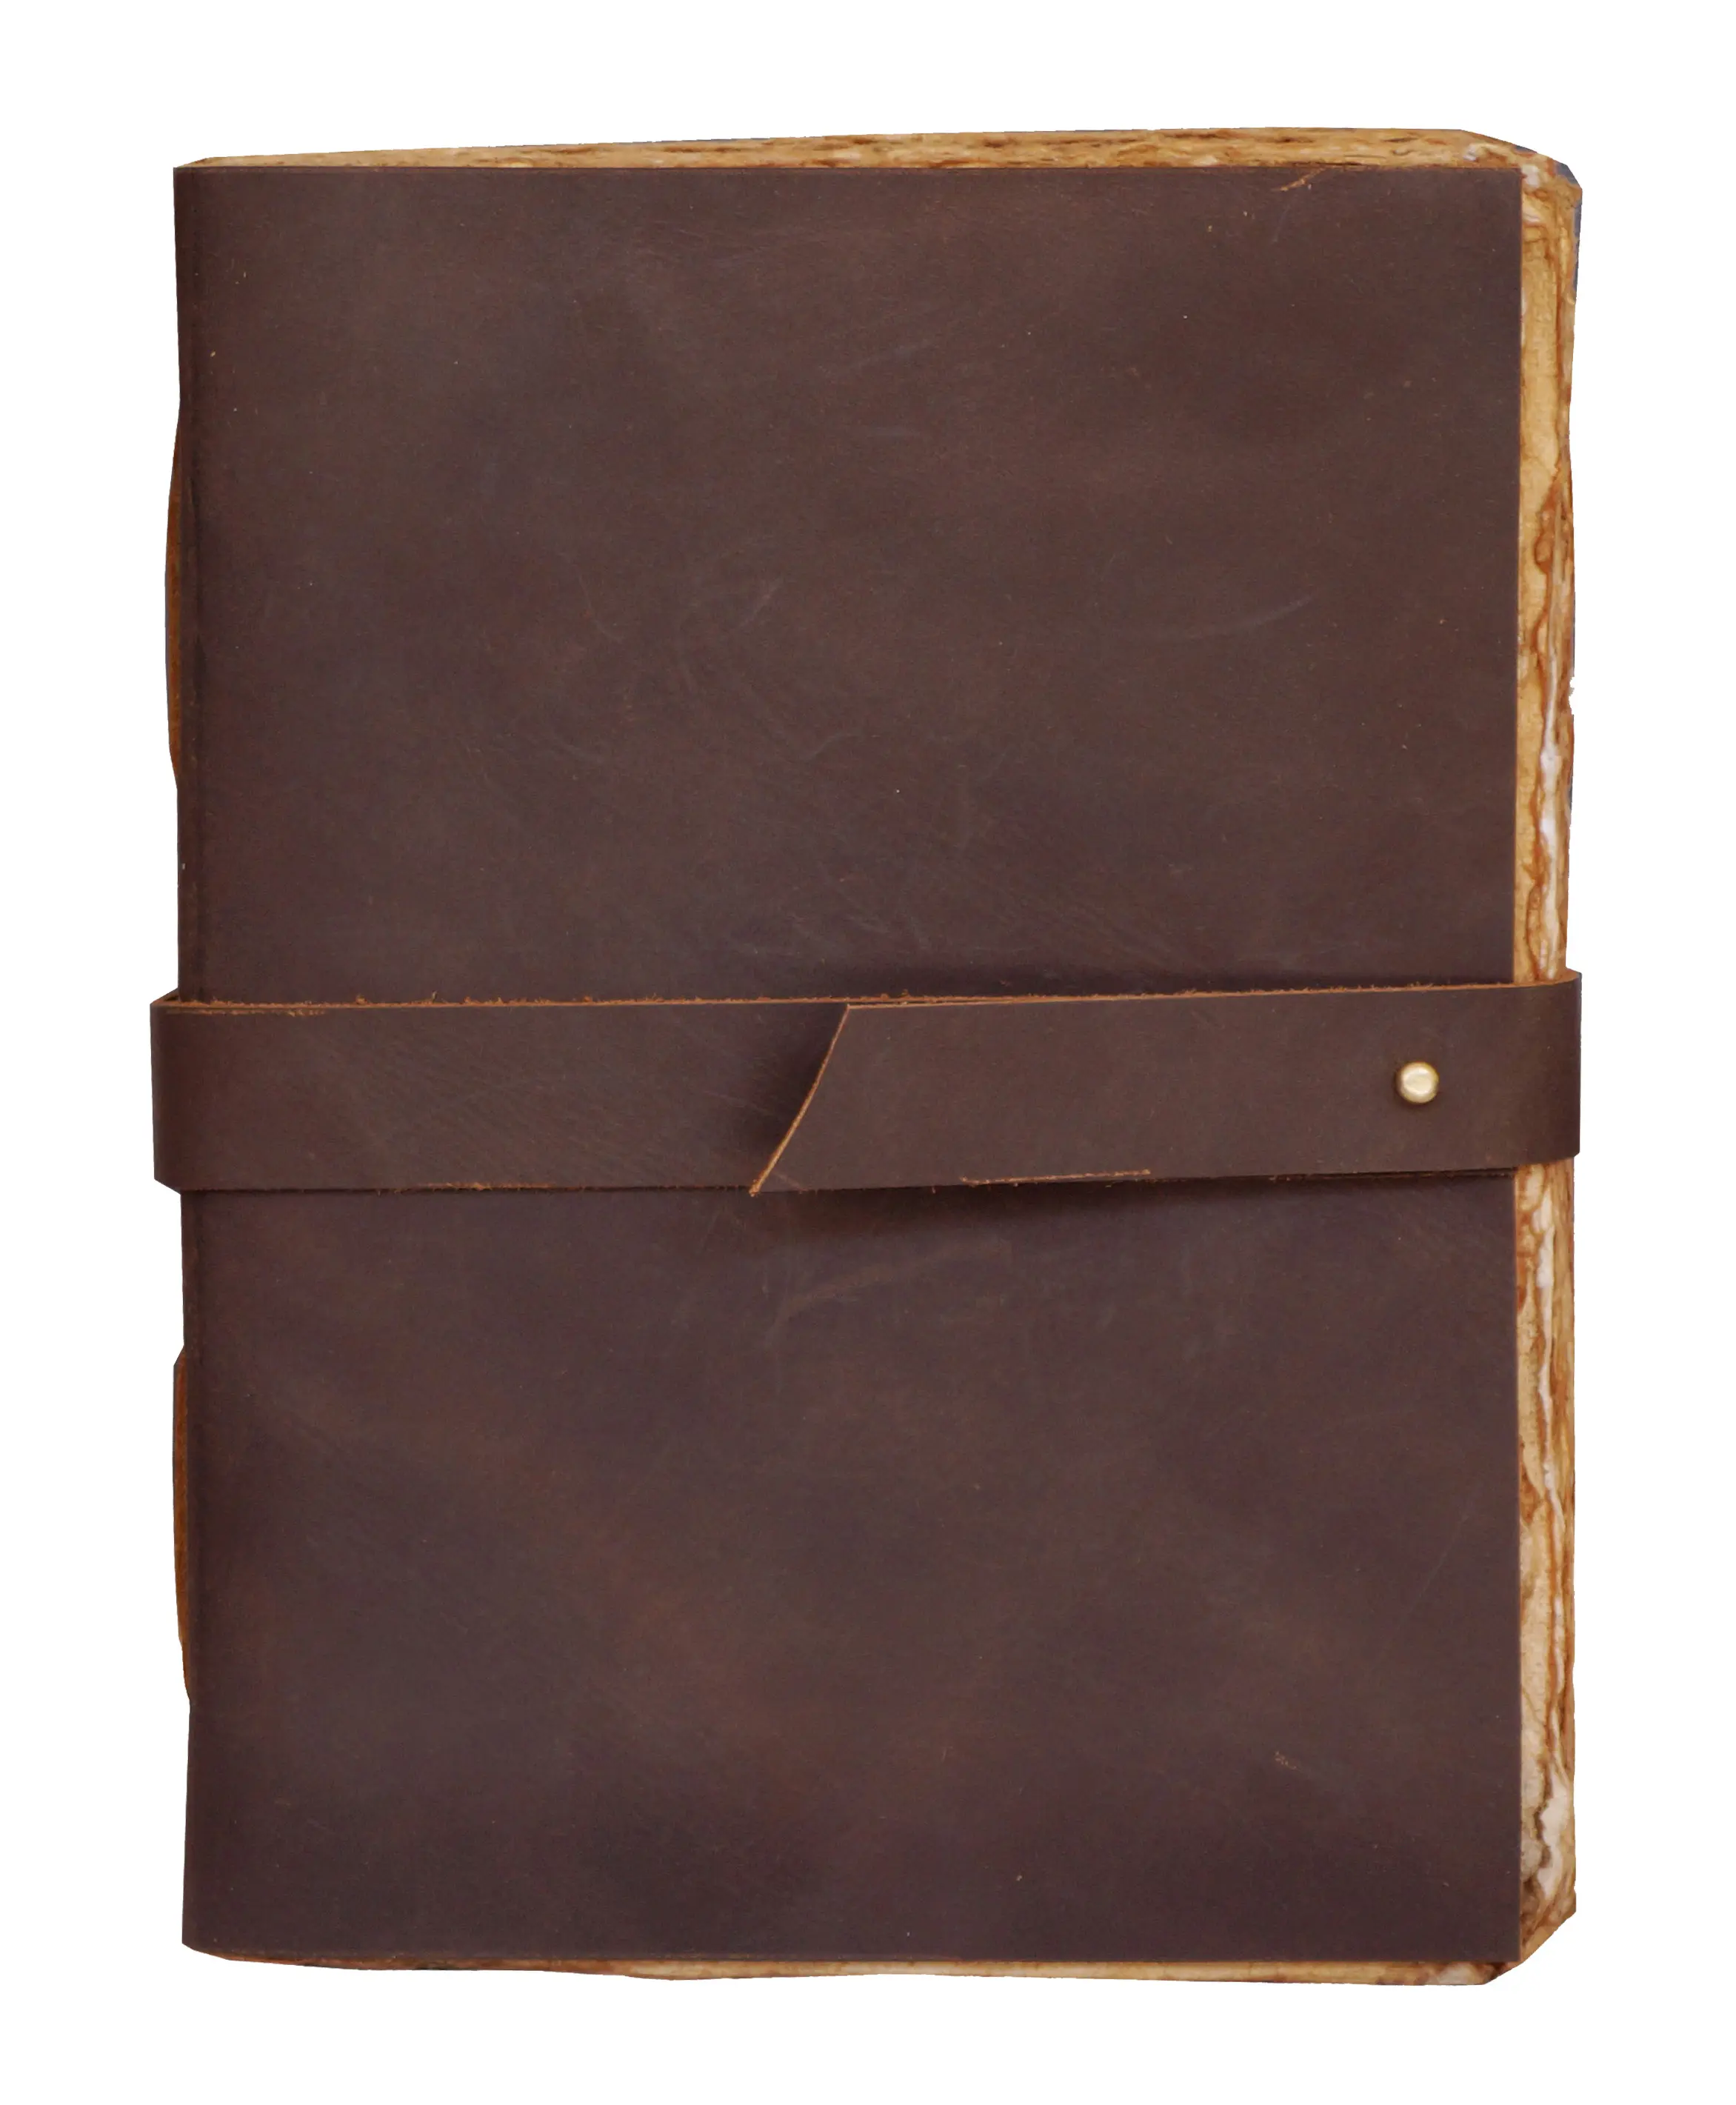 Handmade Leather Journal Writing Notebook- Bound Brown Journals To Write In Present For Unisex Journaling Special Handmade Paper